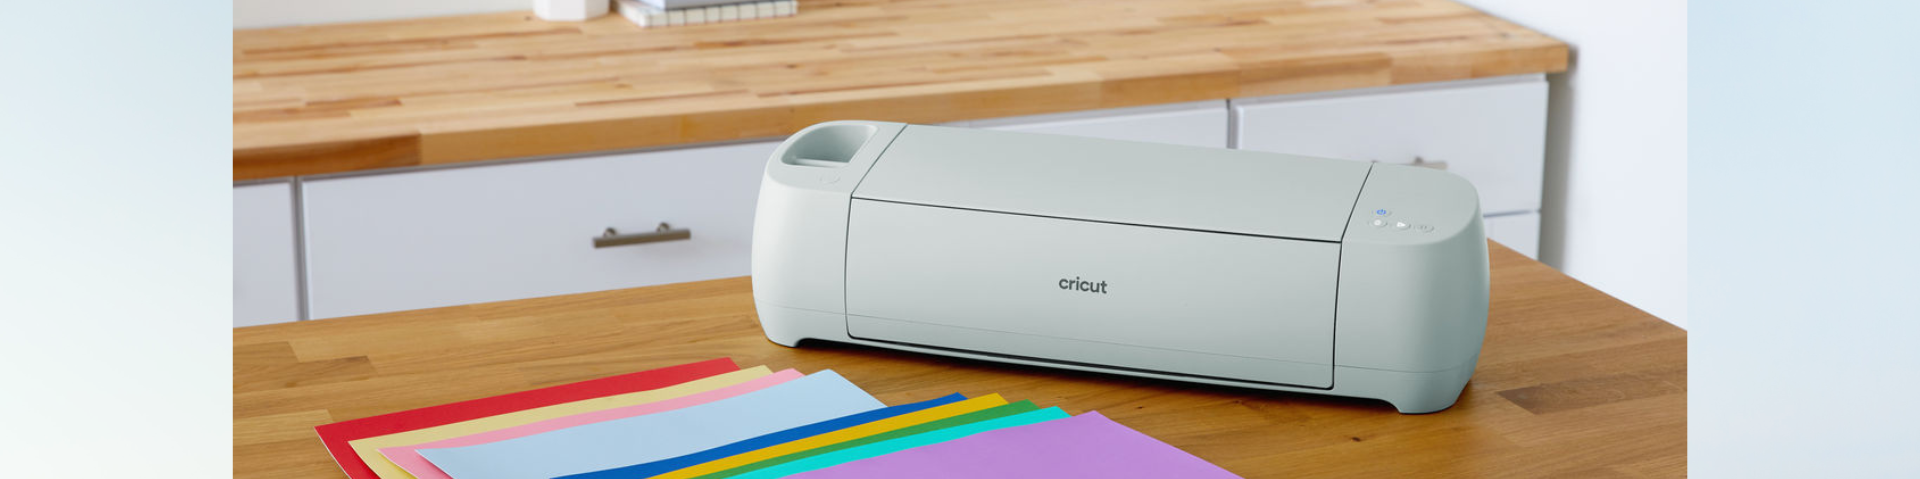 Getting Started with Cricut Explore 3